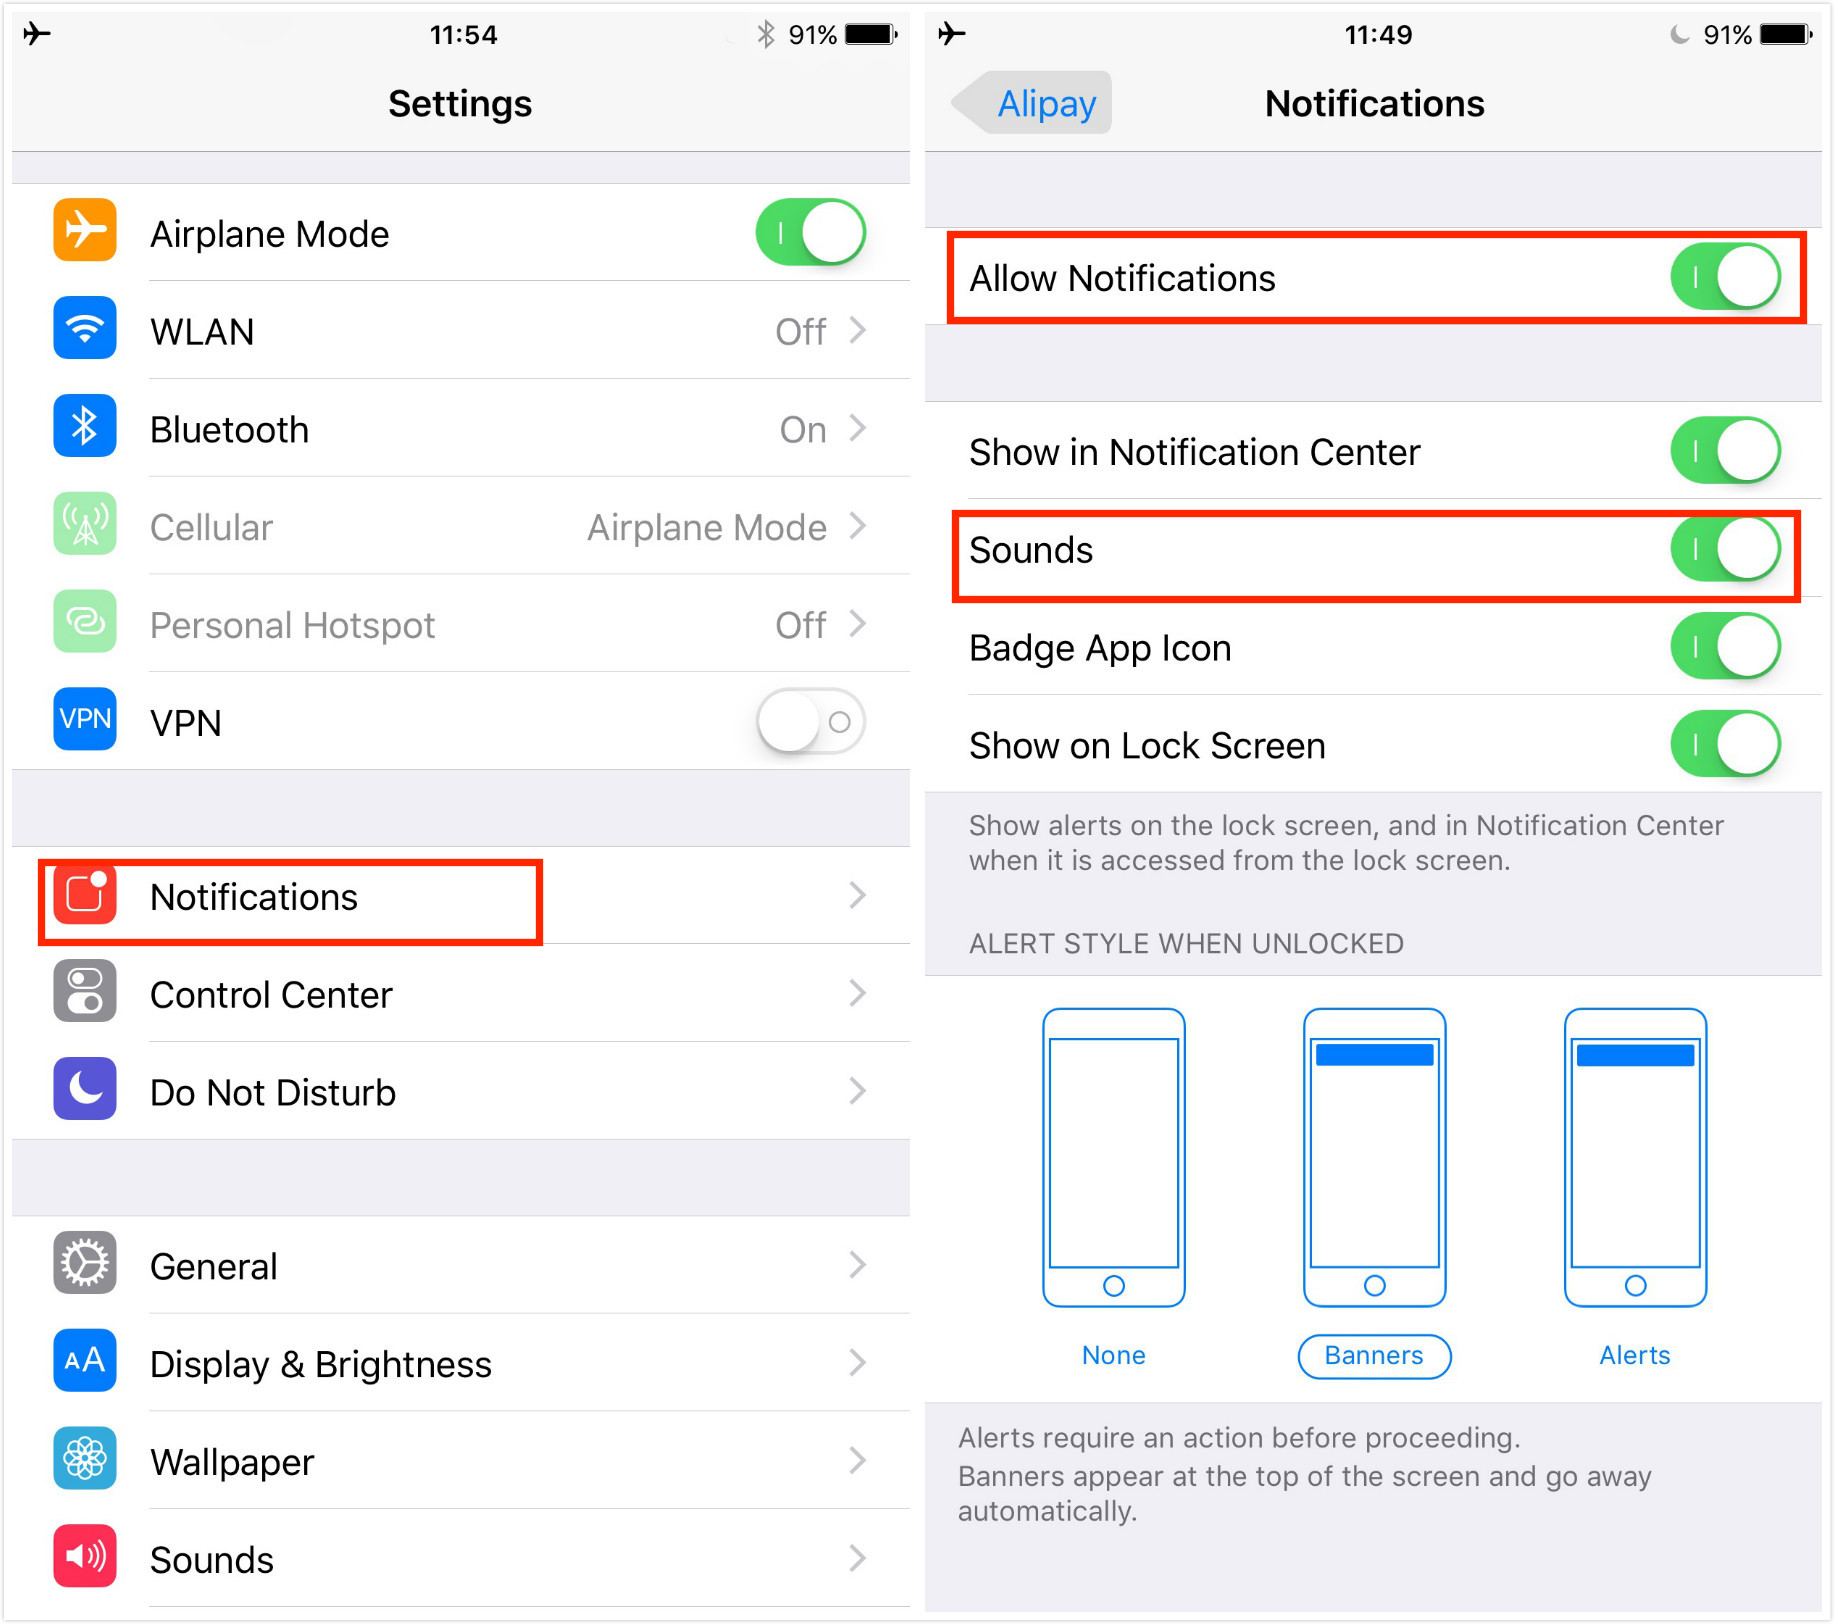 8 Solutions to Fix “iPhone Sound Not Working” iMobie